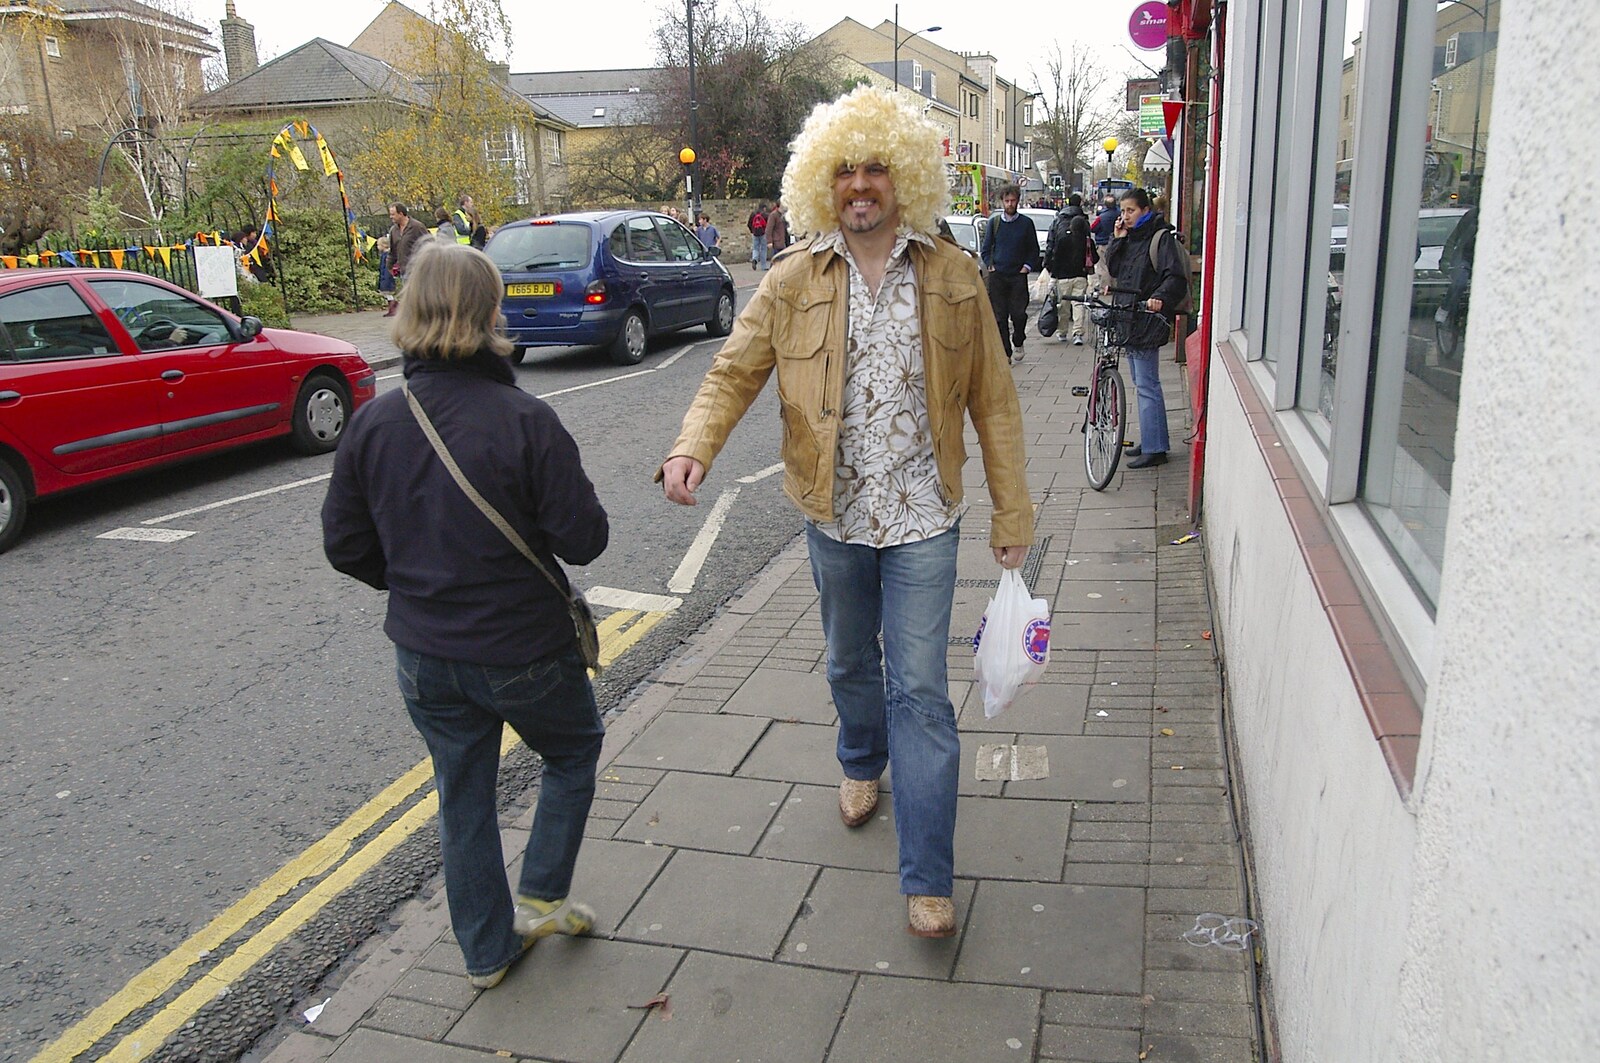 A dude with a big blonde wig from The Winter Fair, Mill Road, Cambridge - 2nd December 2006